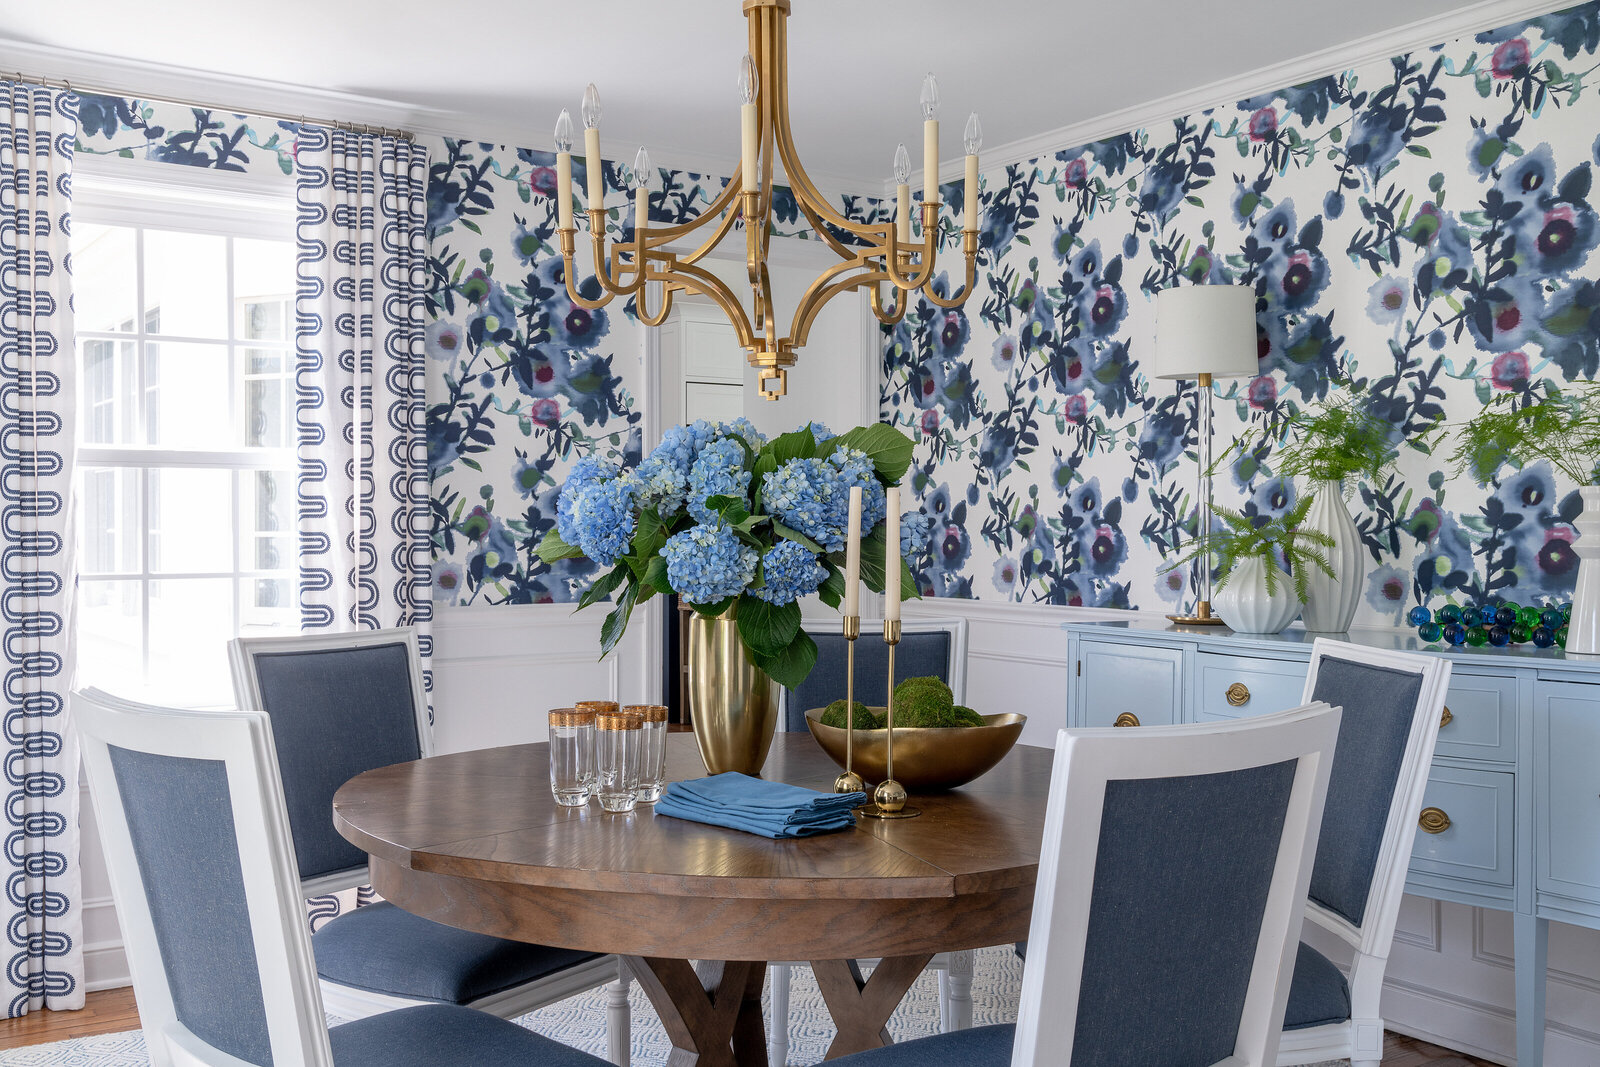 The award-winning interior design firm Prudence Home and Design is one of the best among Fairfield County interior designers.